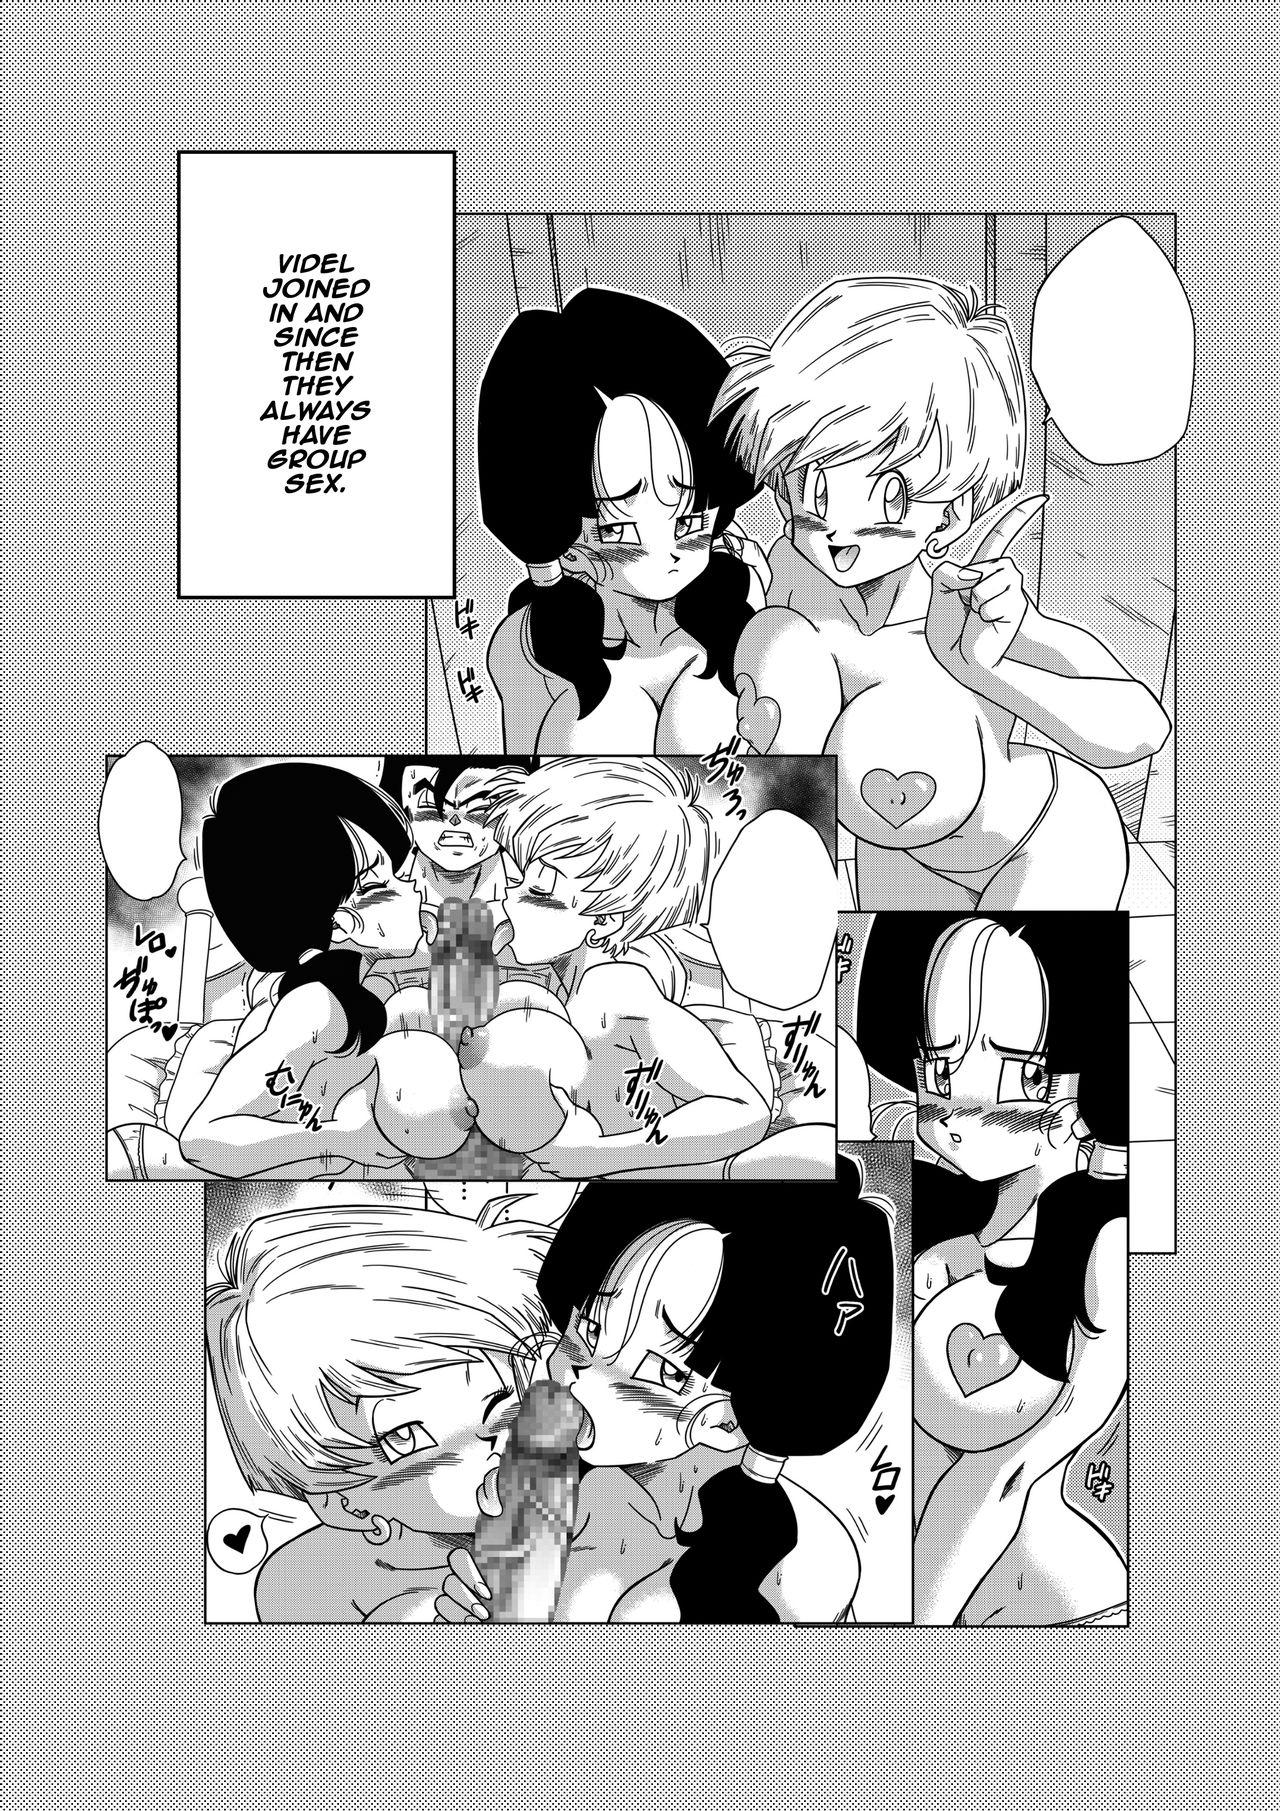 Class Room LOVE TRIANGLE Z PART 4 - Dragon ball z Mouth - Page 4